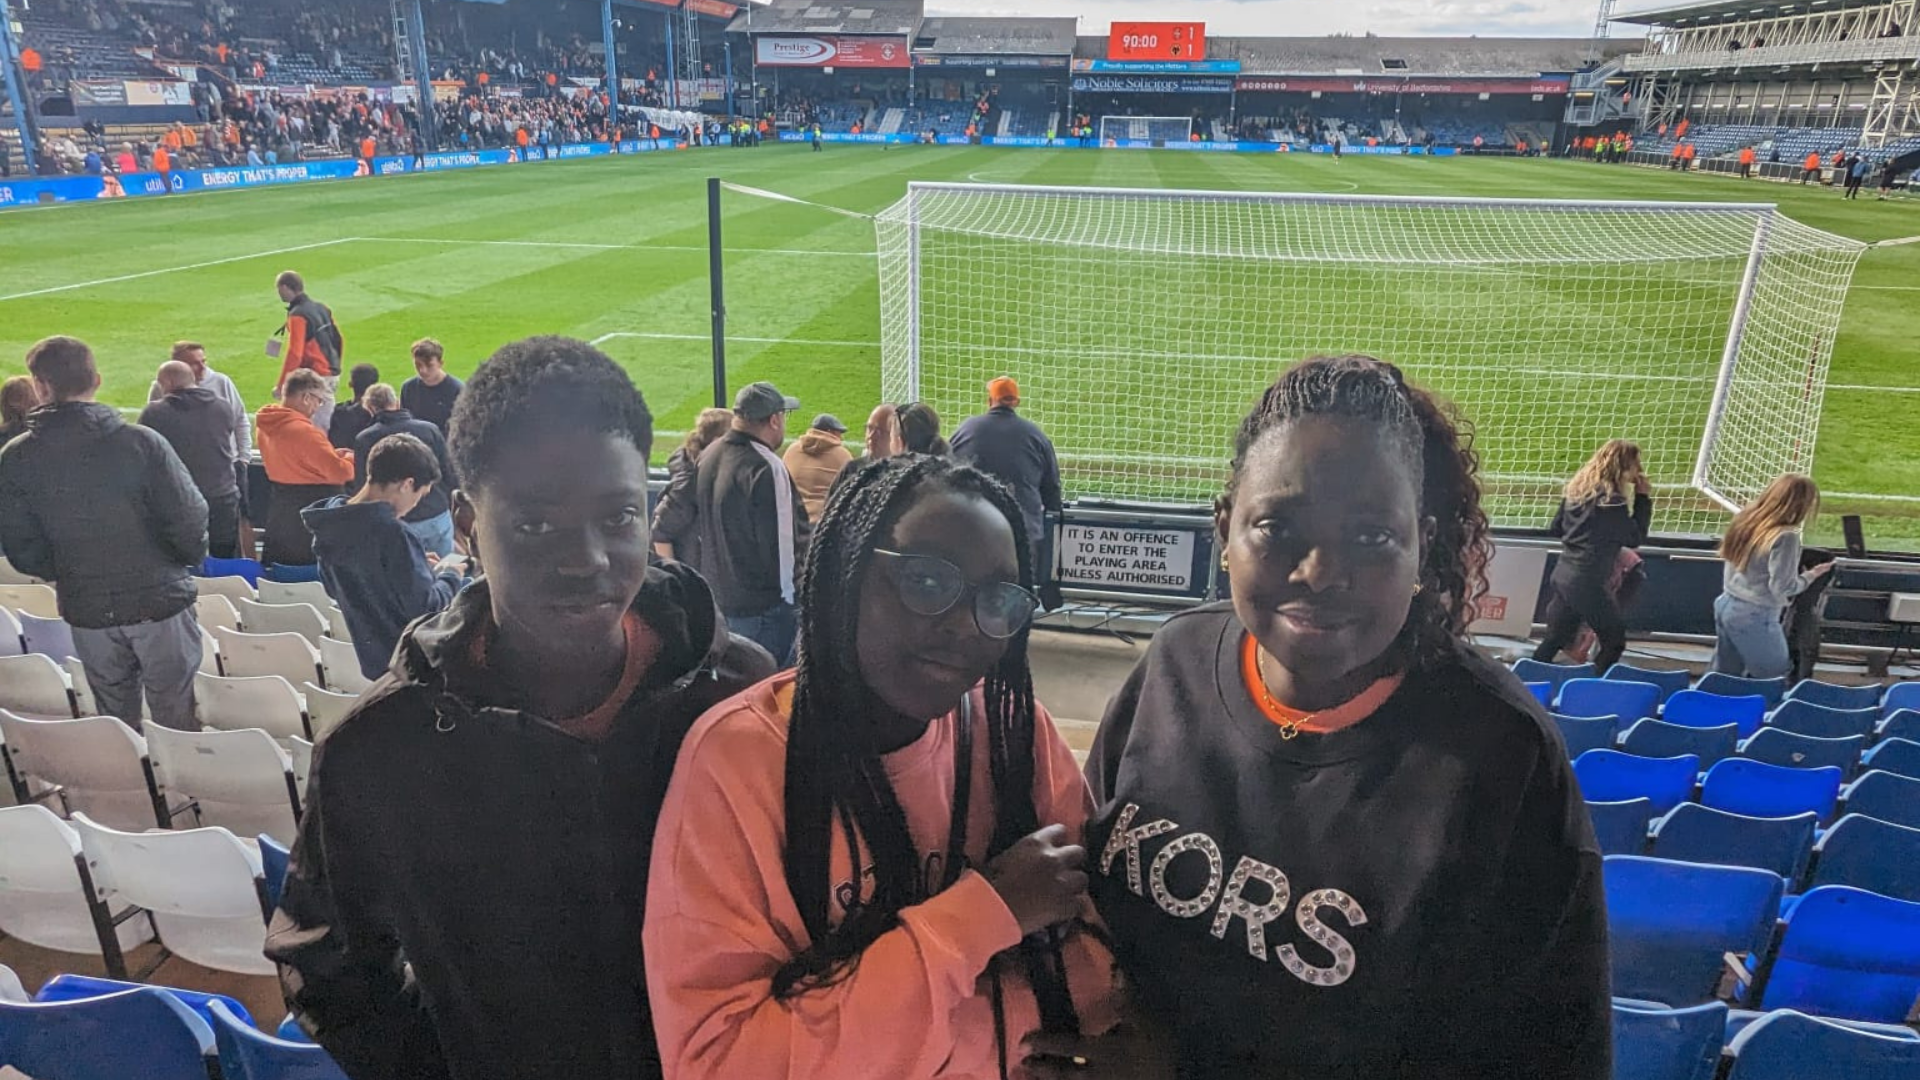 Young carers at the Luton match on Saturday, stood in front of the football pitch and smiling at the camera